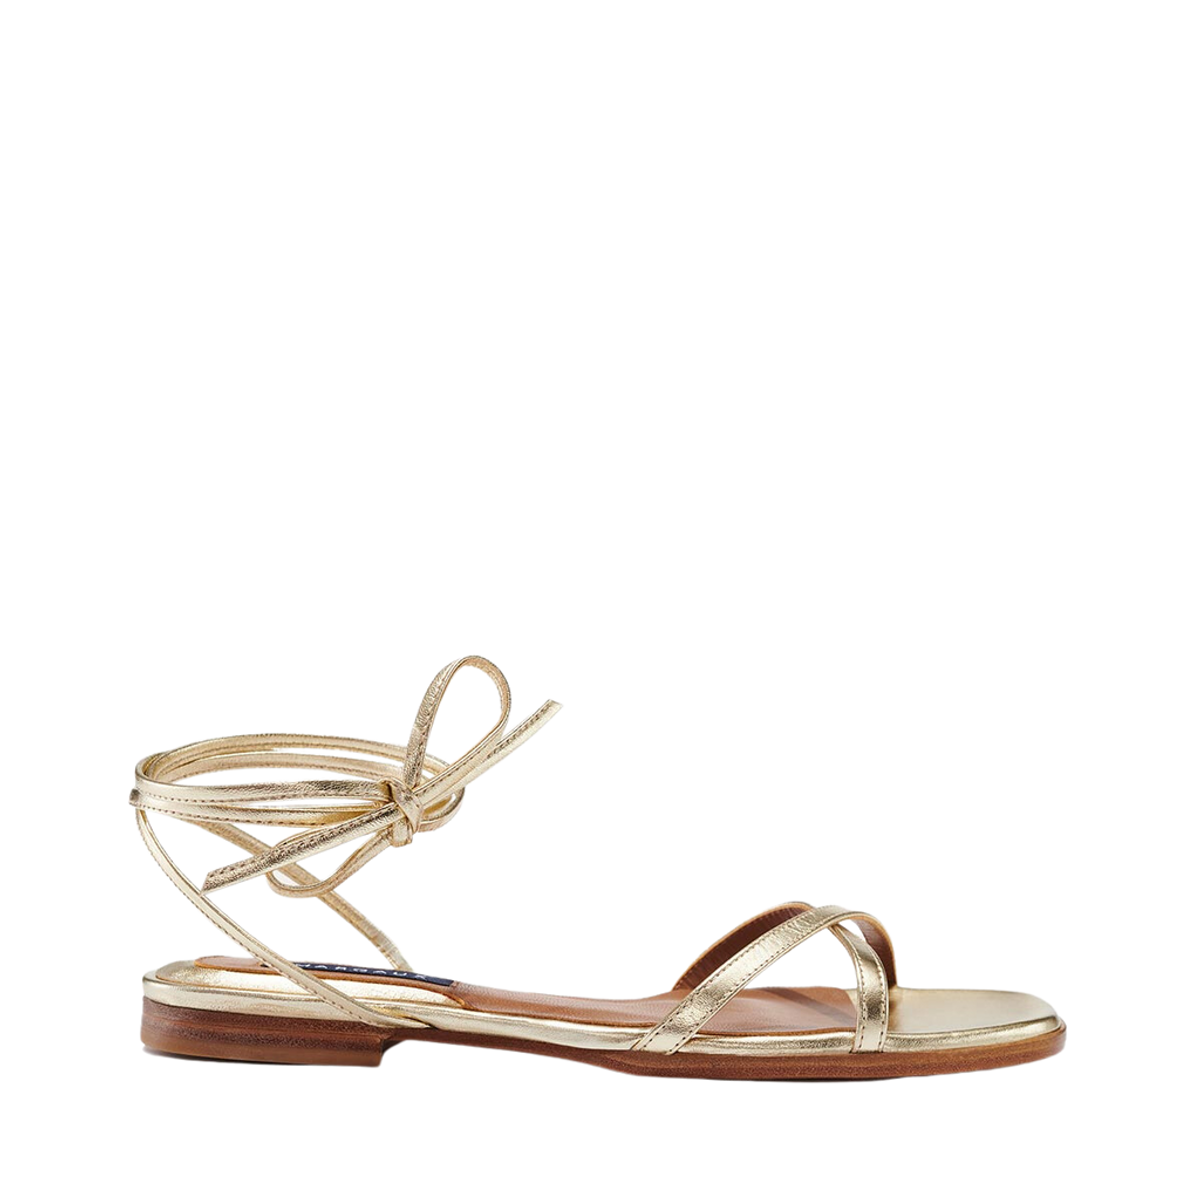 The Wrap Sandal in Champagne